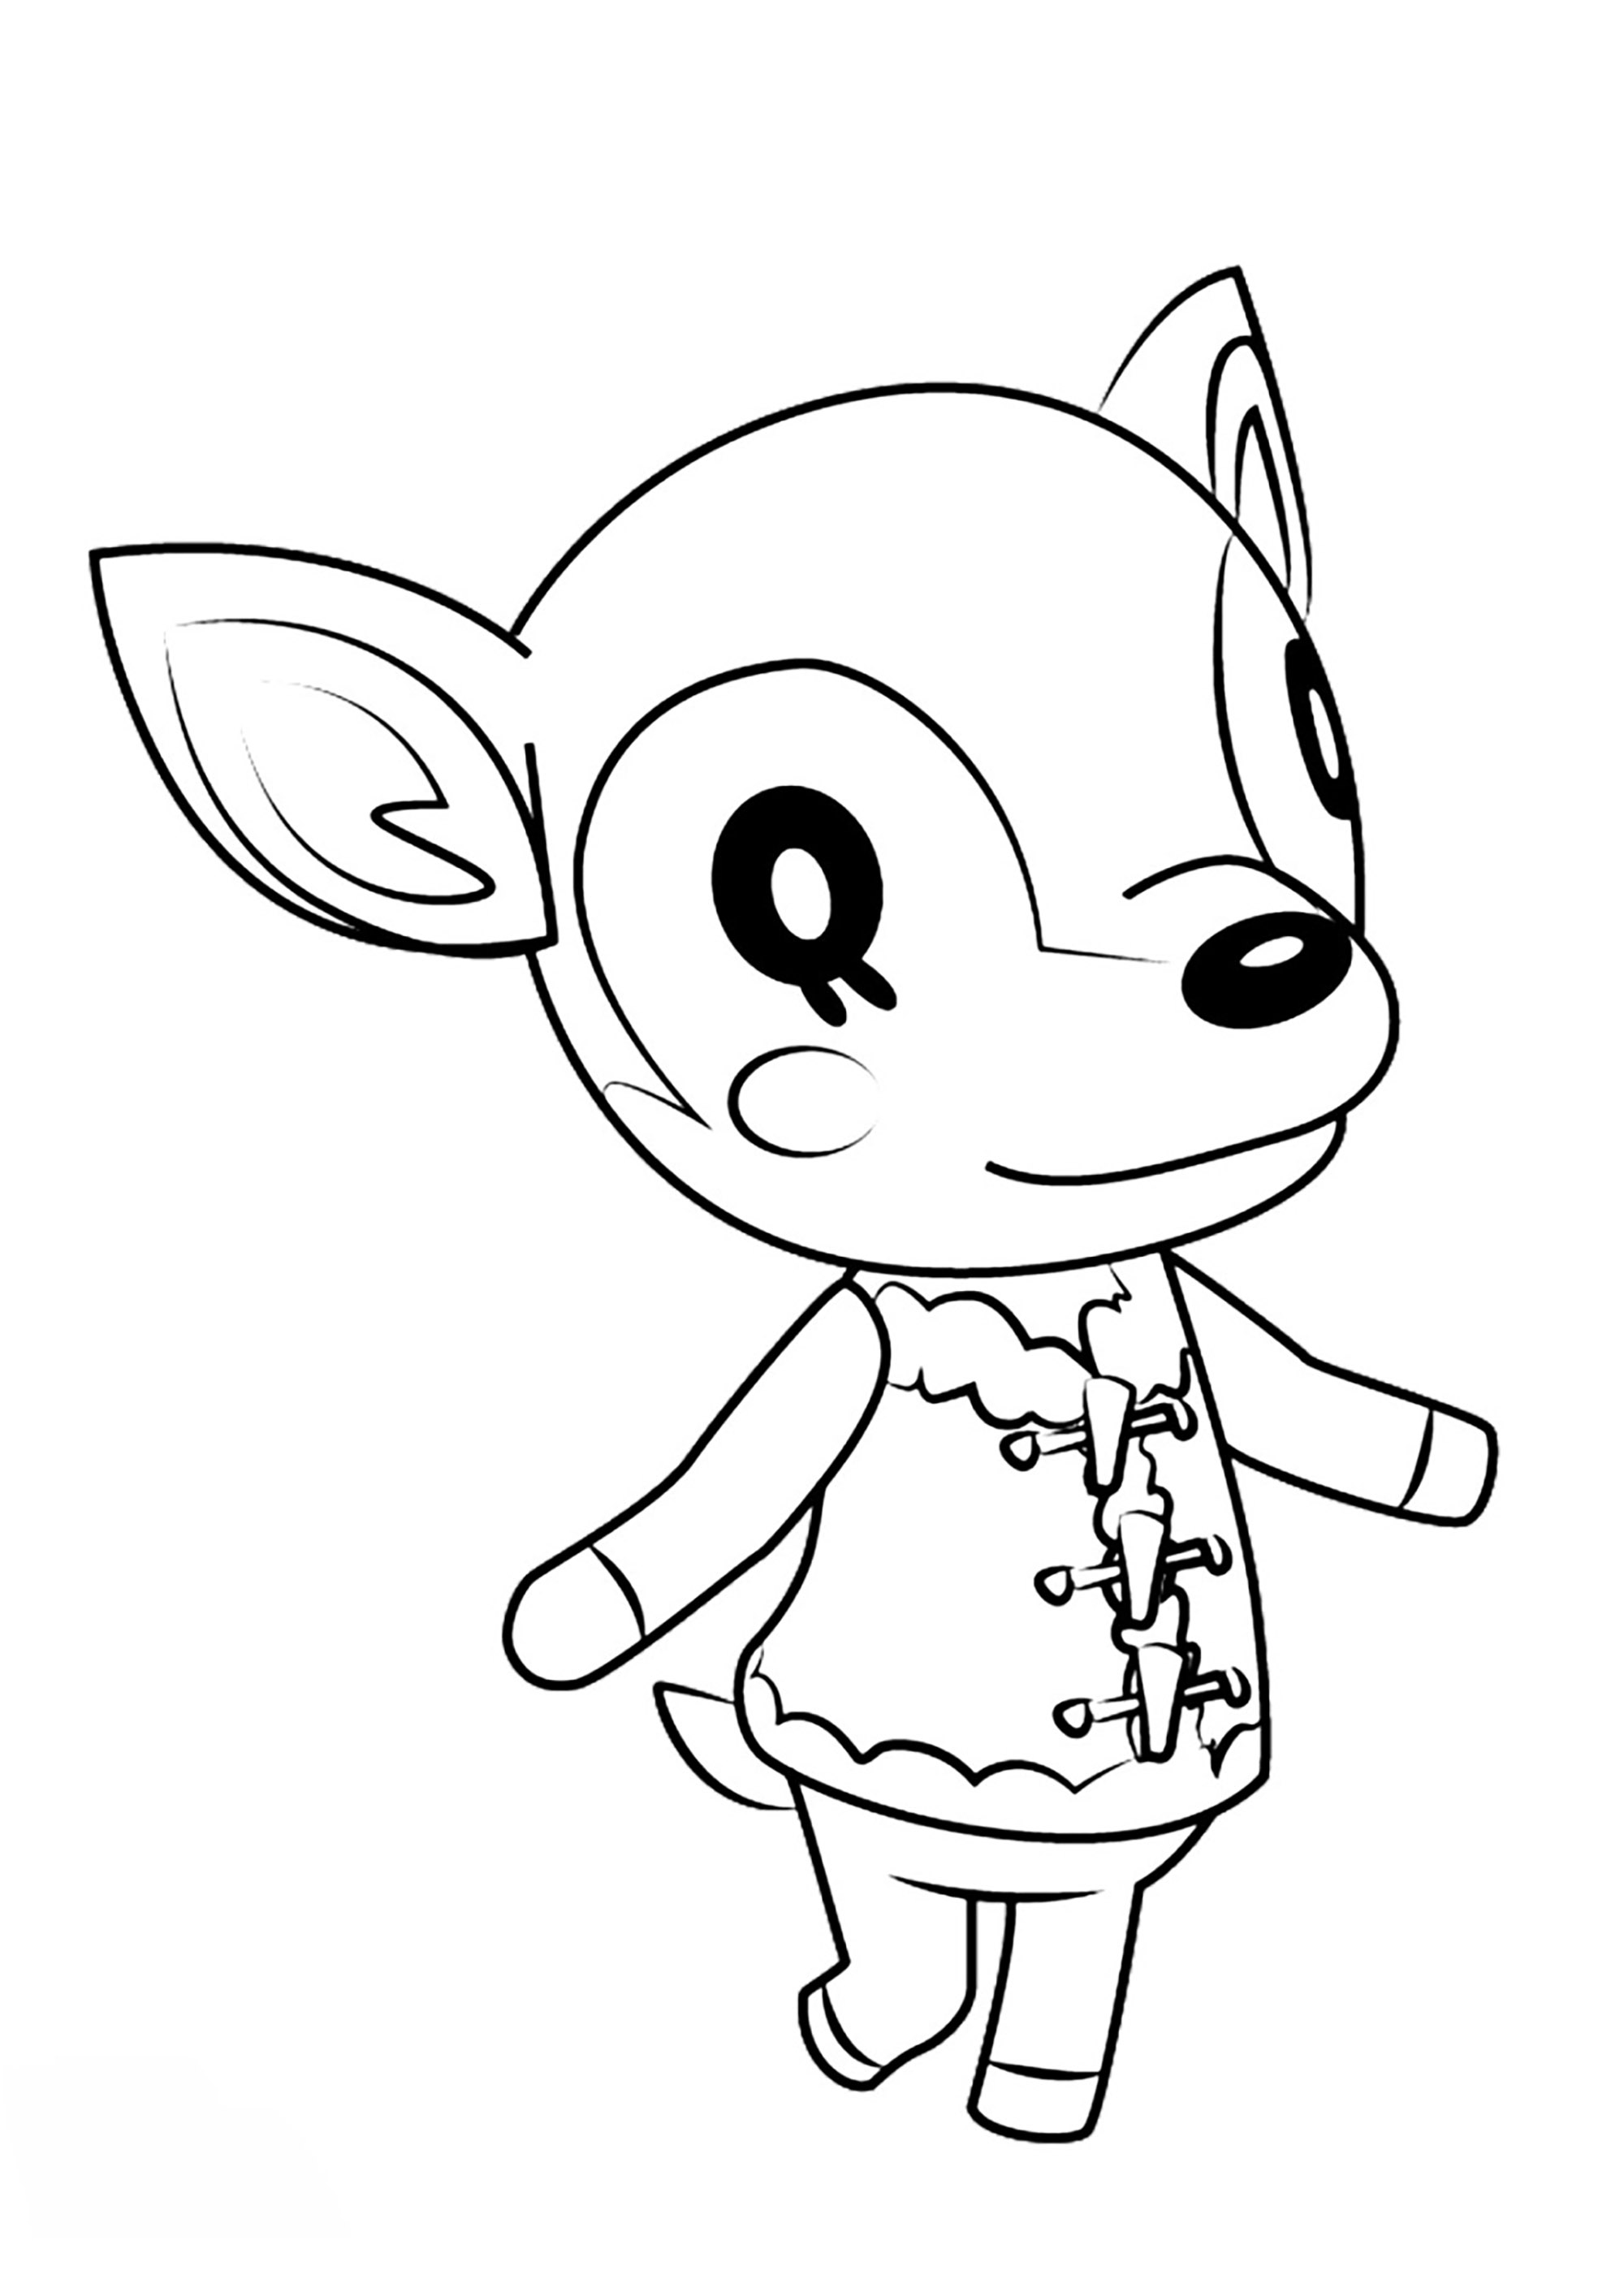 Simple Animal Crossing coloring page to print and color for free